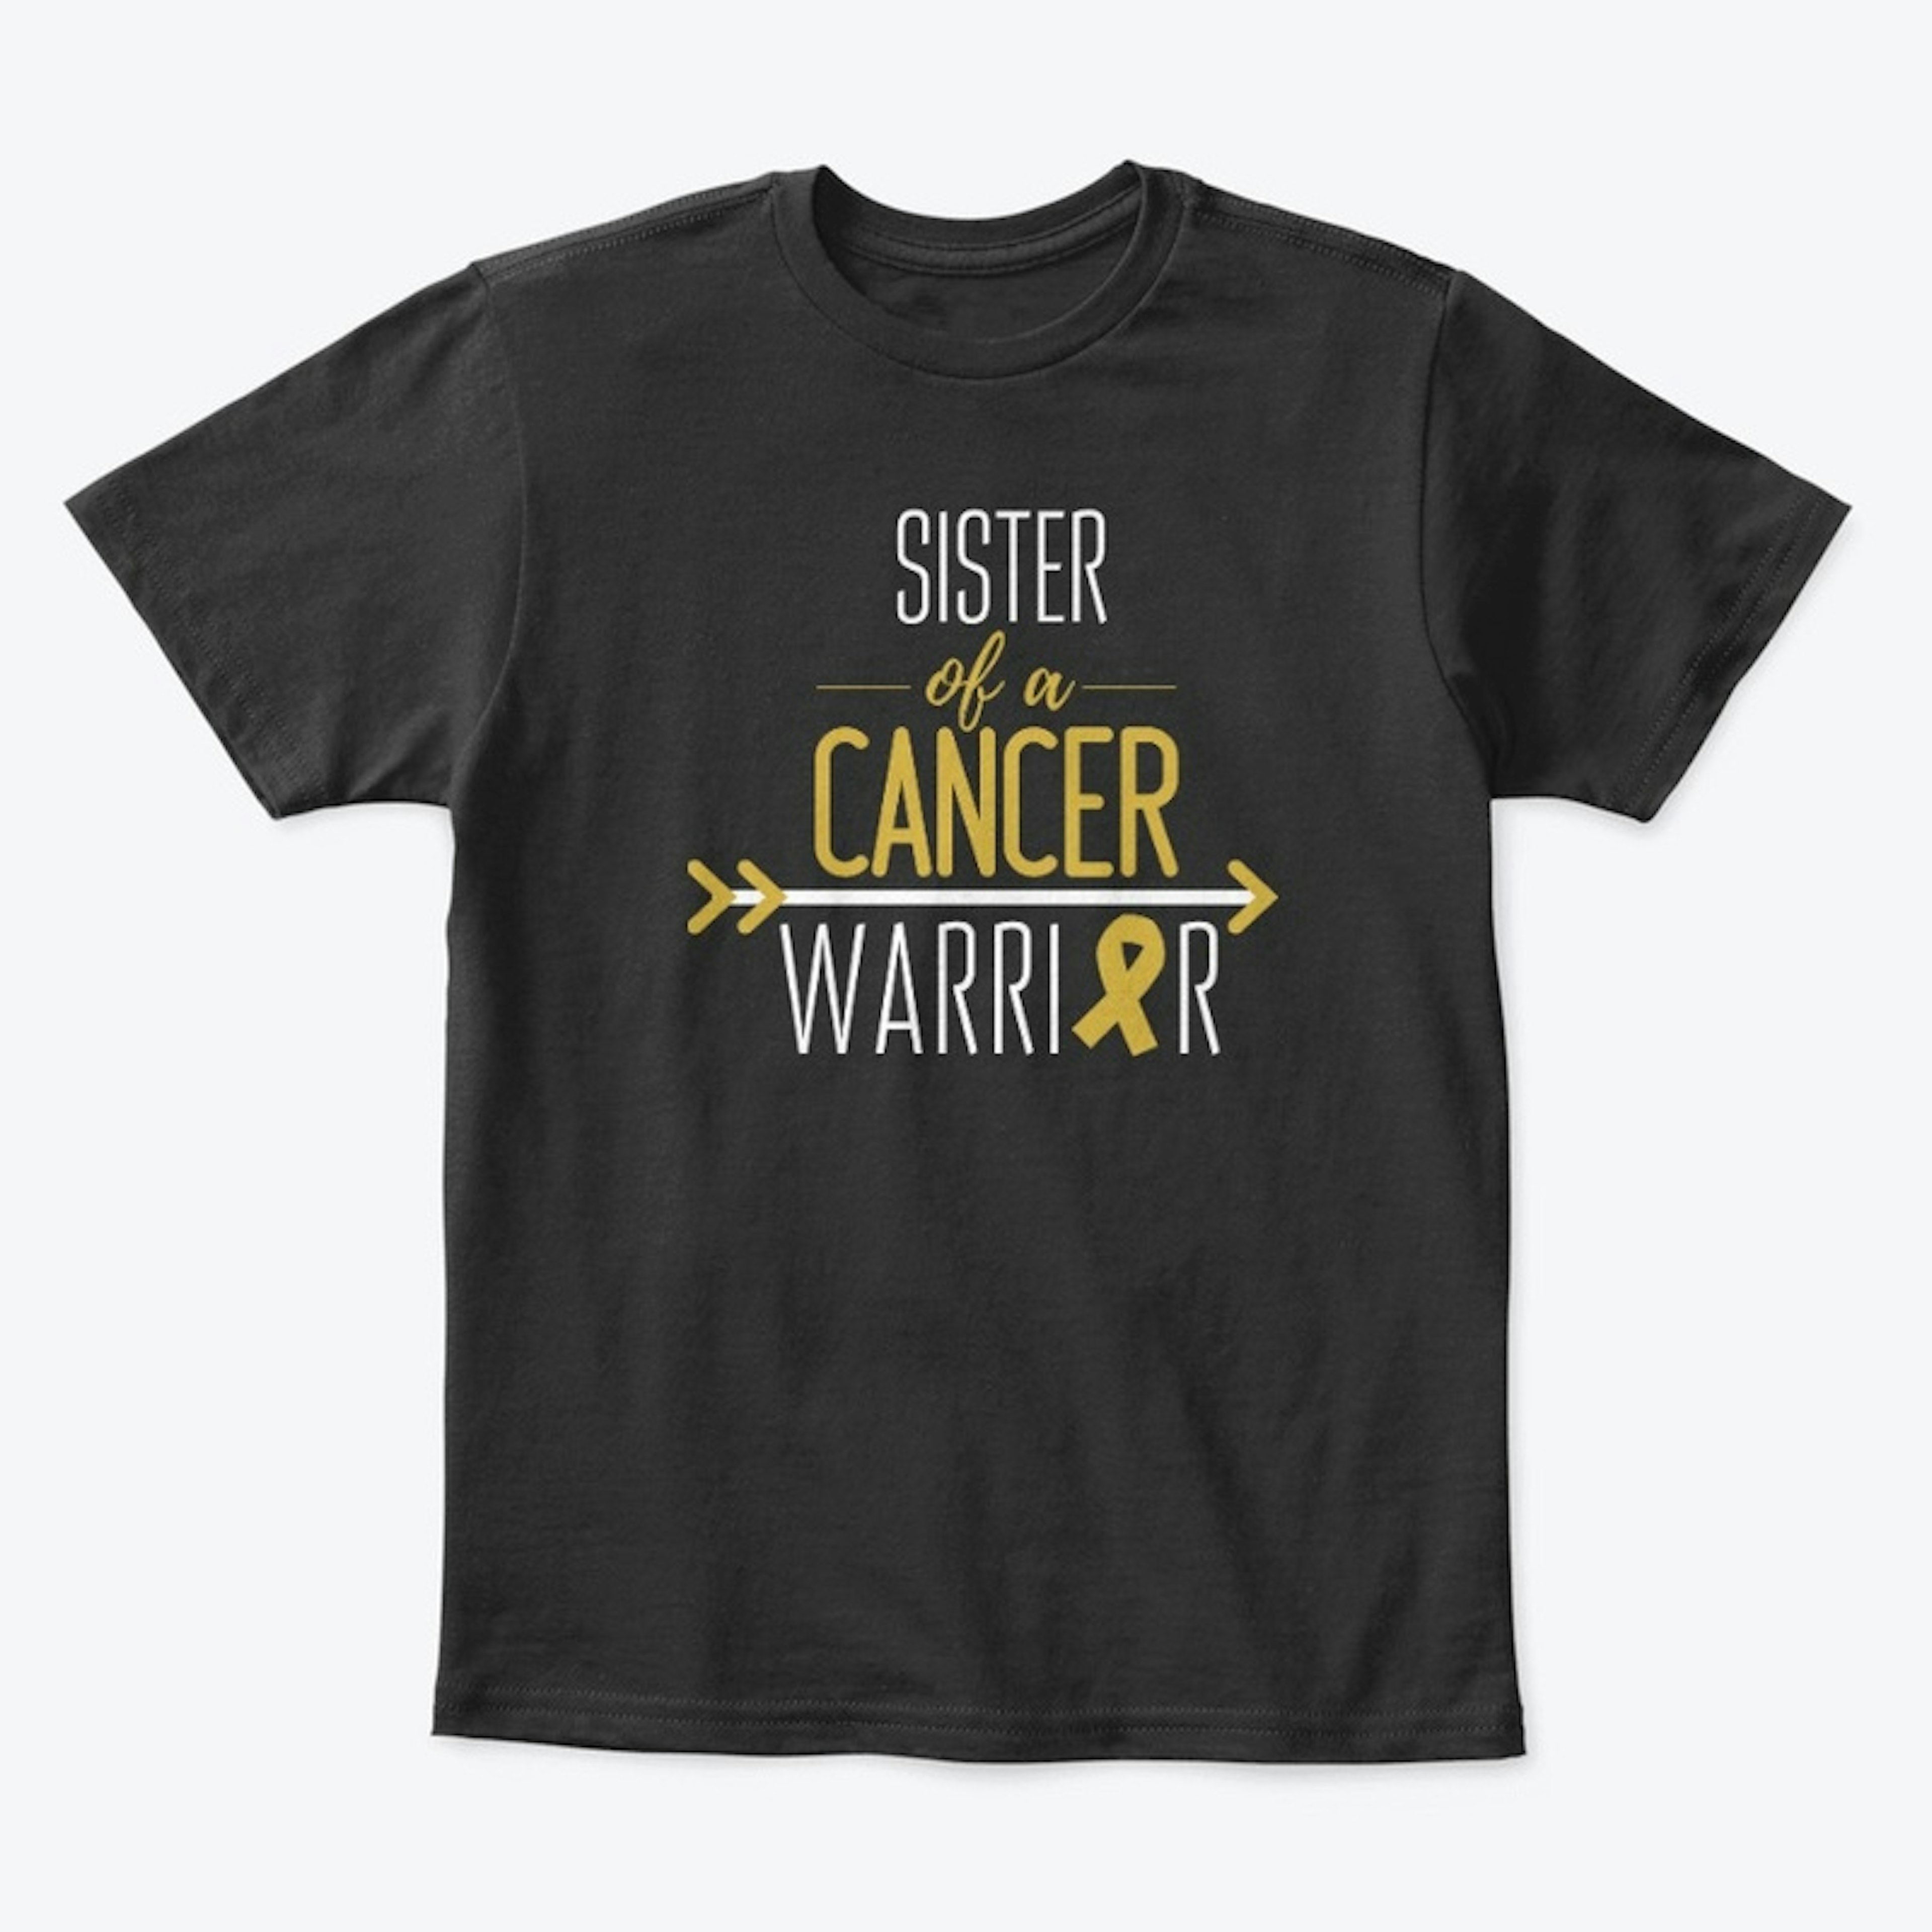 Sister (Child Size) of a Cancer Warrior